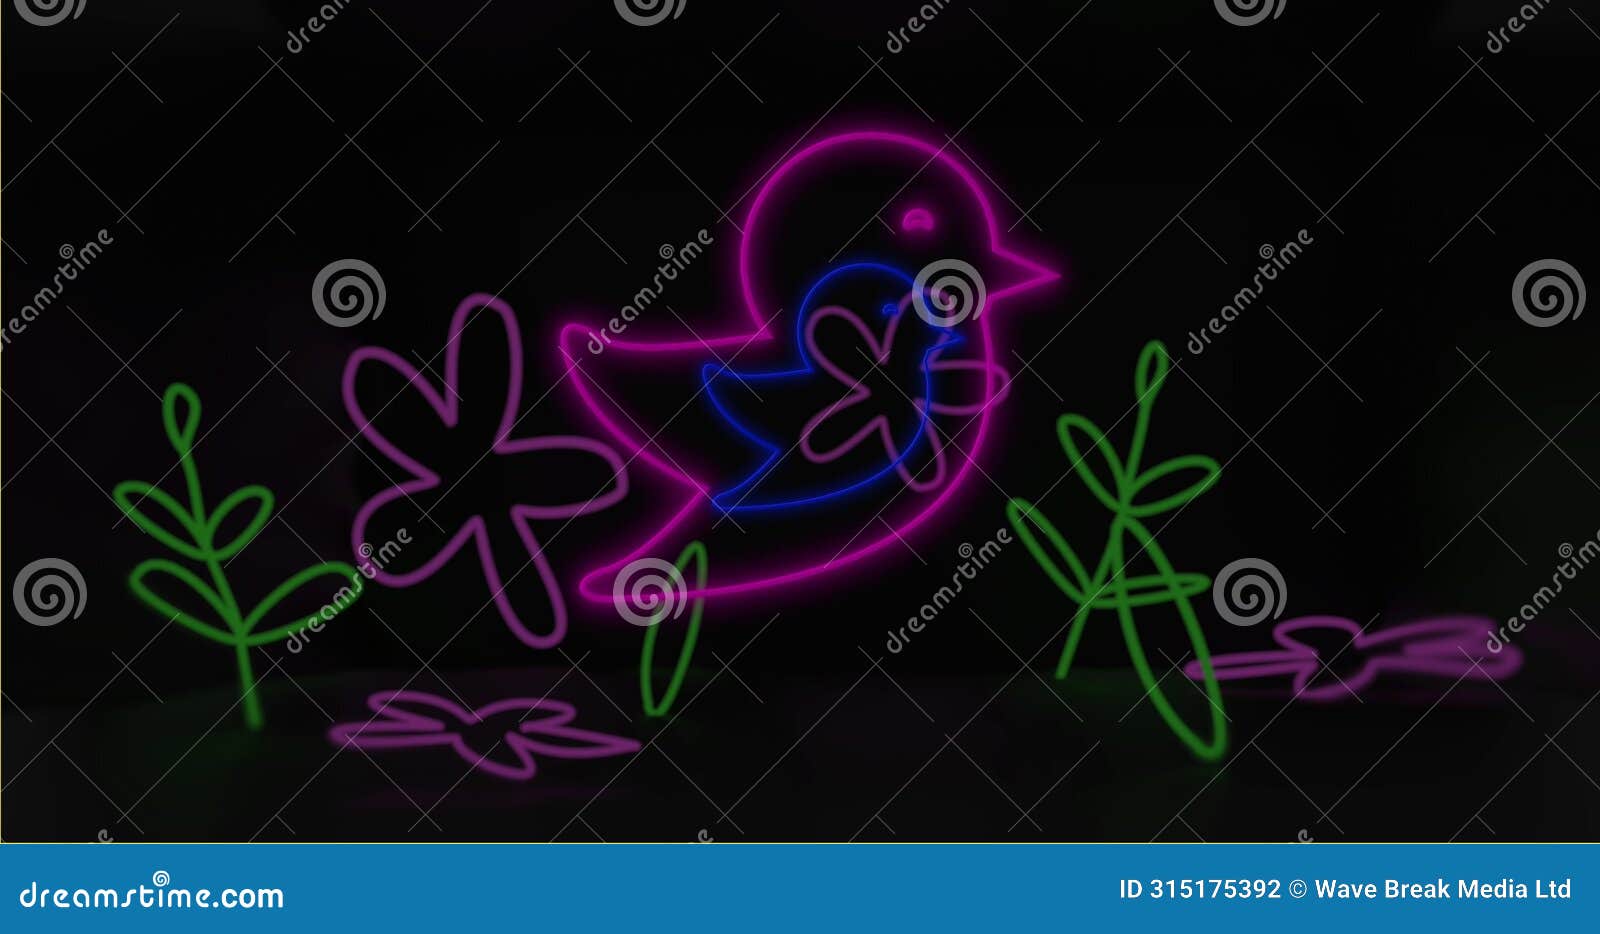 neon sign showing bird in flight decorates a dark room, casting a colorful glow